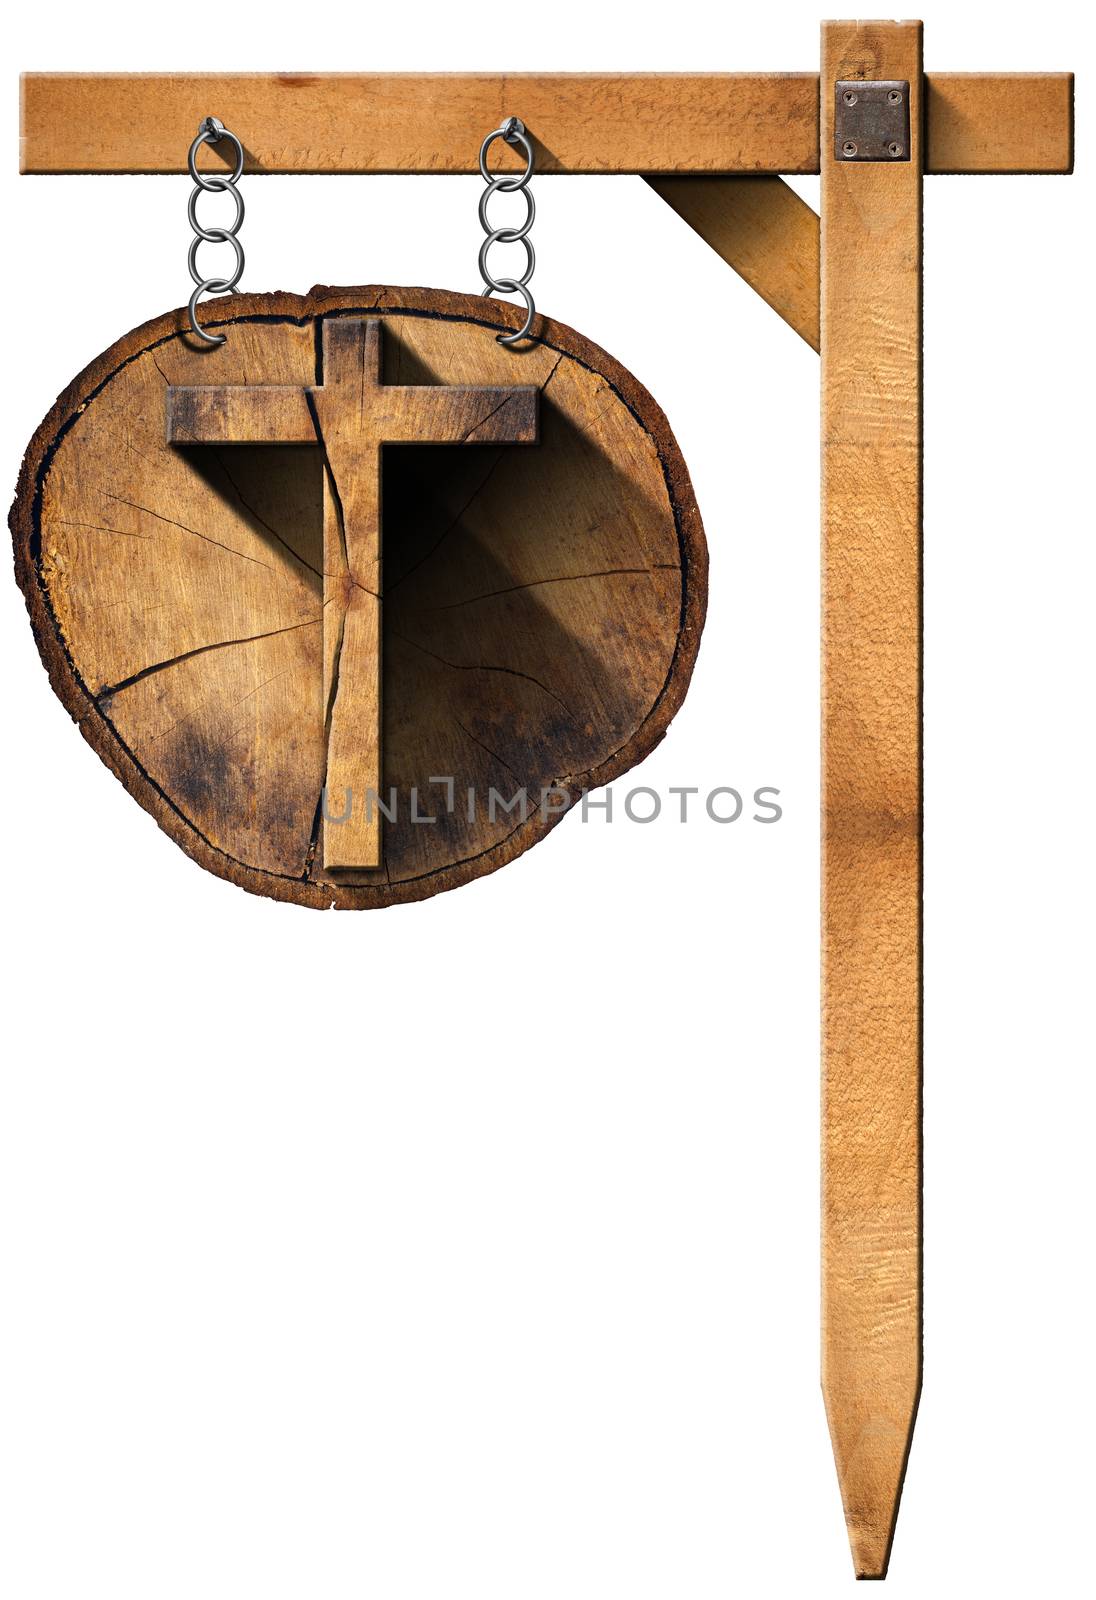 Wooden Christian cross on a section of tree trunk, hanging from a metal chain on a wooden pole and isolated on white background